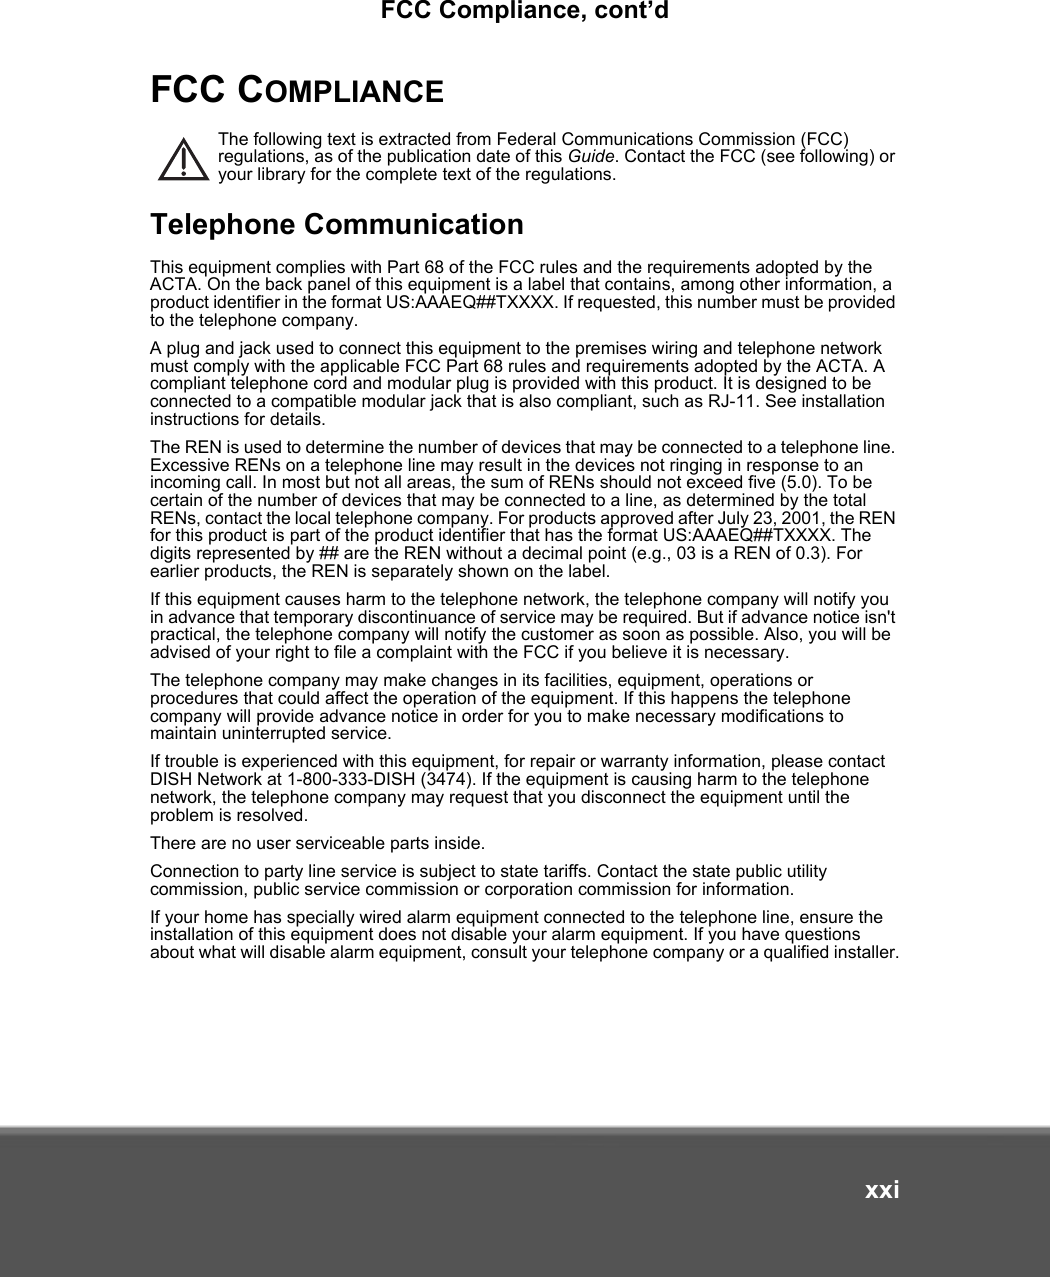 FCC Compliance, cont’dxxiFCC COMPLIANCEThe following text is extracted from Federal Communications Commission (FCC) regulations, as of the publication date of this Guide. Contact the FCC (see following) or your library for the complete text of the regulations.Telephone CommunicationThis equipment complies with Part 68 of the FCC rules and the requirements adopted by the ACTA. On the back panel of this equipment is a label that contains, among other information, a product identifier in the format US:AAAEQ##TXXXX. If requested, this number must be provided to the telephone company.A plug and jack used to connect this equipment to the premises wiring and telephone network must comply with the applicable FCC Part 68 rules and requirements adopted by the ACTA. A compliant telephone cord and modular plug is provided with this product. It is designed to be connected to a compatible modular jack that is also compliant, such as RJ-11. See installation instructions for details.The REN is used to determine the number of devices that may be connected to a telephone line. Excessive RENs on a telephone line may result in the devices not ringing in response to an incoming call. In most but not all areas, the sum of RENs should not exceed five (5.0). To be certain of the number of devices that may be connected to a line, as determined by the total RENs, contact the local telephone company. For products approved after July 23, 2001, the REN for this product is part of the product identifier that has the format US:AAAEQ##TXXXX. The digits represented by ## are the REN without a decimal point (e.g., 03 is a REN of 0.3). For earlier products, the REN is separately shown on the label.If this equipment causes harm to the telephone network, the telephone company will notify you in advance that temporary discontinuance of service may be required. But if advance notice isn&apos;t practical, the telephone company will notify the customer as soon as possible. Also, you will be advised of your right to file a complaint with the FCC if you believe it is necessary.The telephone company may make changes in its facilities, equipment, operations or procedures that could affect the operation of the equipment. If this happens the telephone company will provide advance notice in order for you to make necessary modifications to maintain uninterrupted service.If trouble is experienced with this equipment, for repair or warranty information, please contact DISH Network at 1-800-333-DISH (3474). If the equipment is causing harm to the telephone network, the telephone company may request that you disconnect the equipment until the problem is resolved.There are no user serviceable parts inside. Connection to party line service is subject to state tariffs. Contact the state public utility commission, public service commission or corporation commission for information.If your home has specially wired alarm equipment connected to the telephone line, ensure the installation of this equipment does not disable your alarm equipment. If you have questions about what will disable alarm equipment, consult your telephone company or a qualified installer.